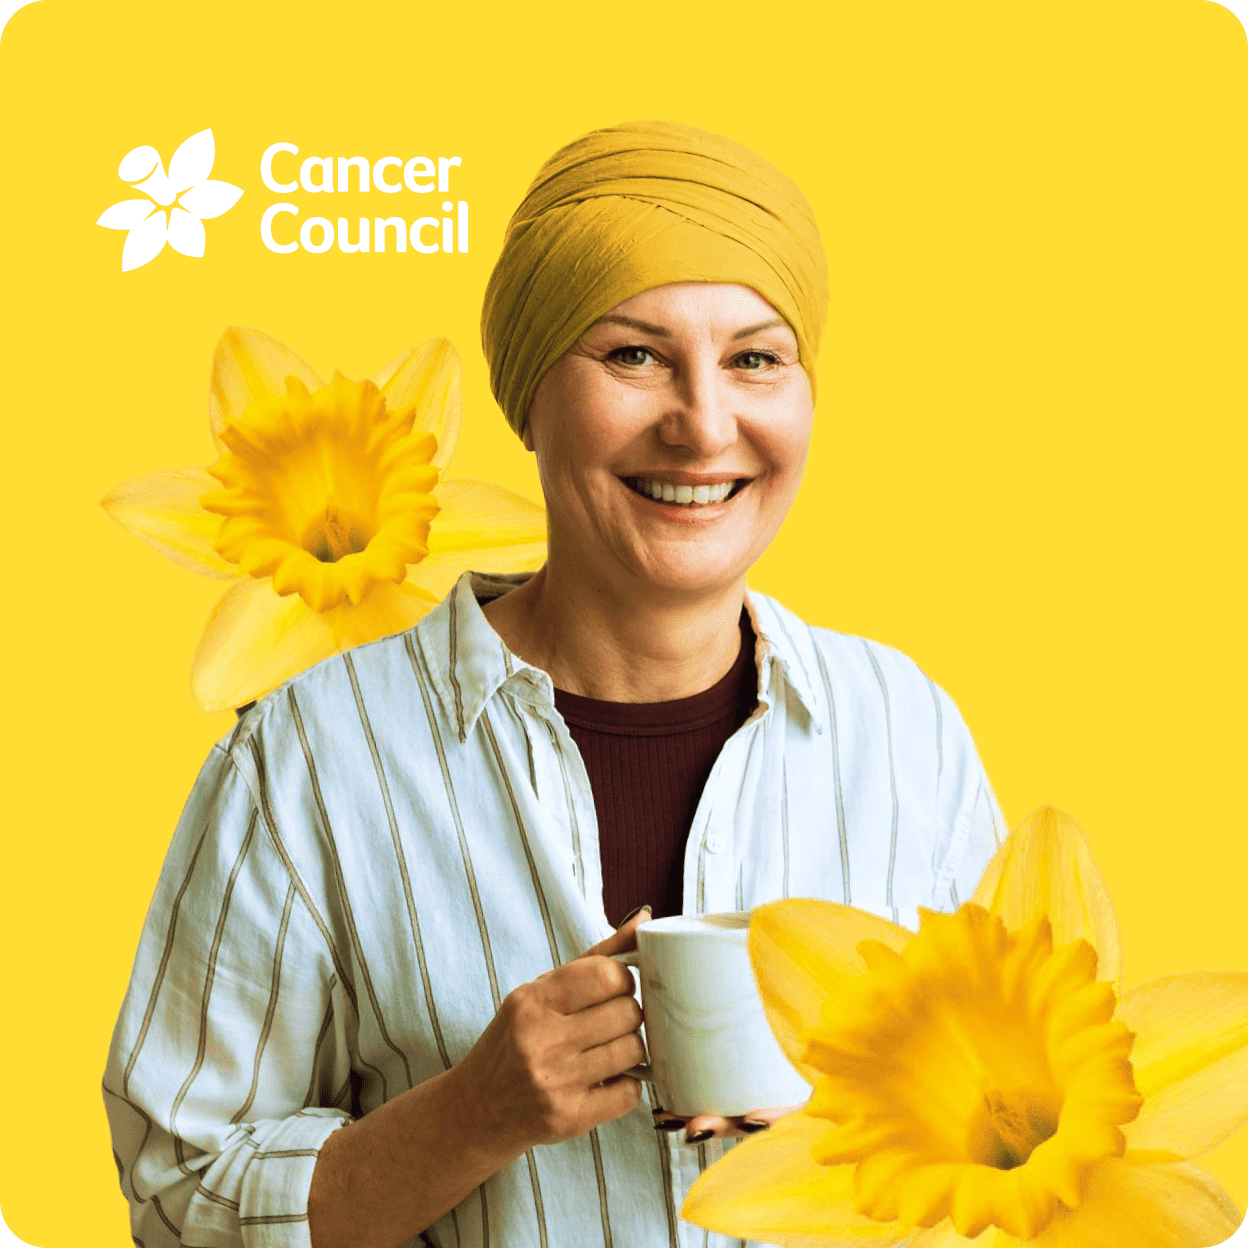 Cancer Council Australia headless CMS and UX web project